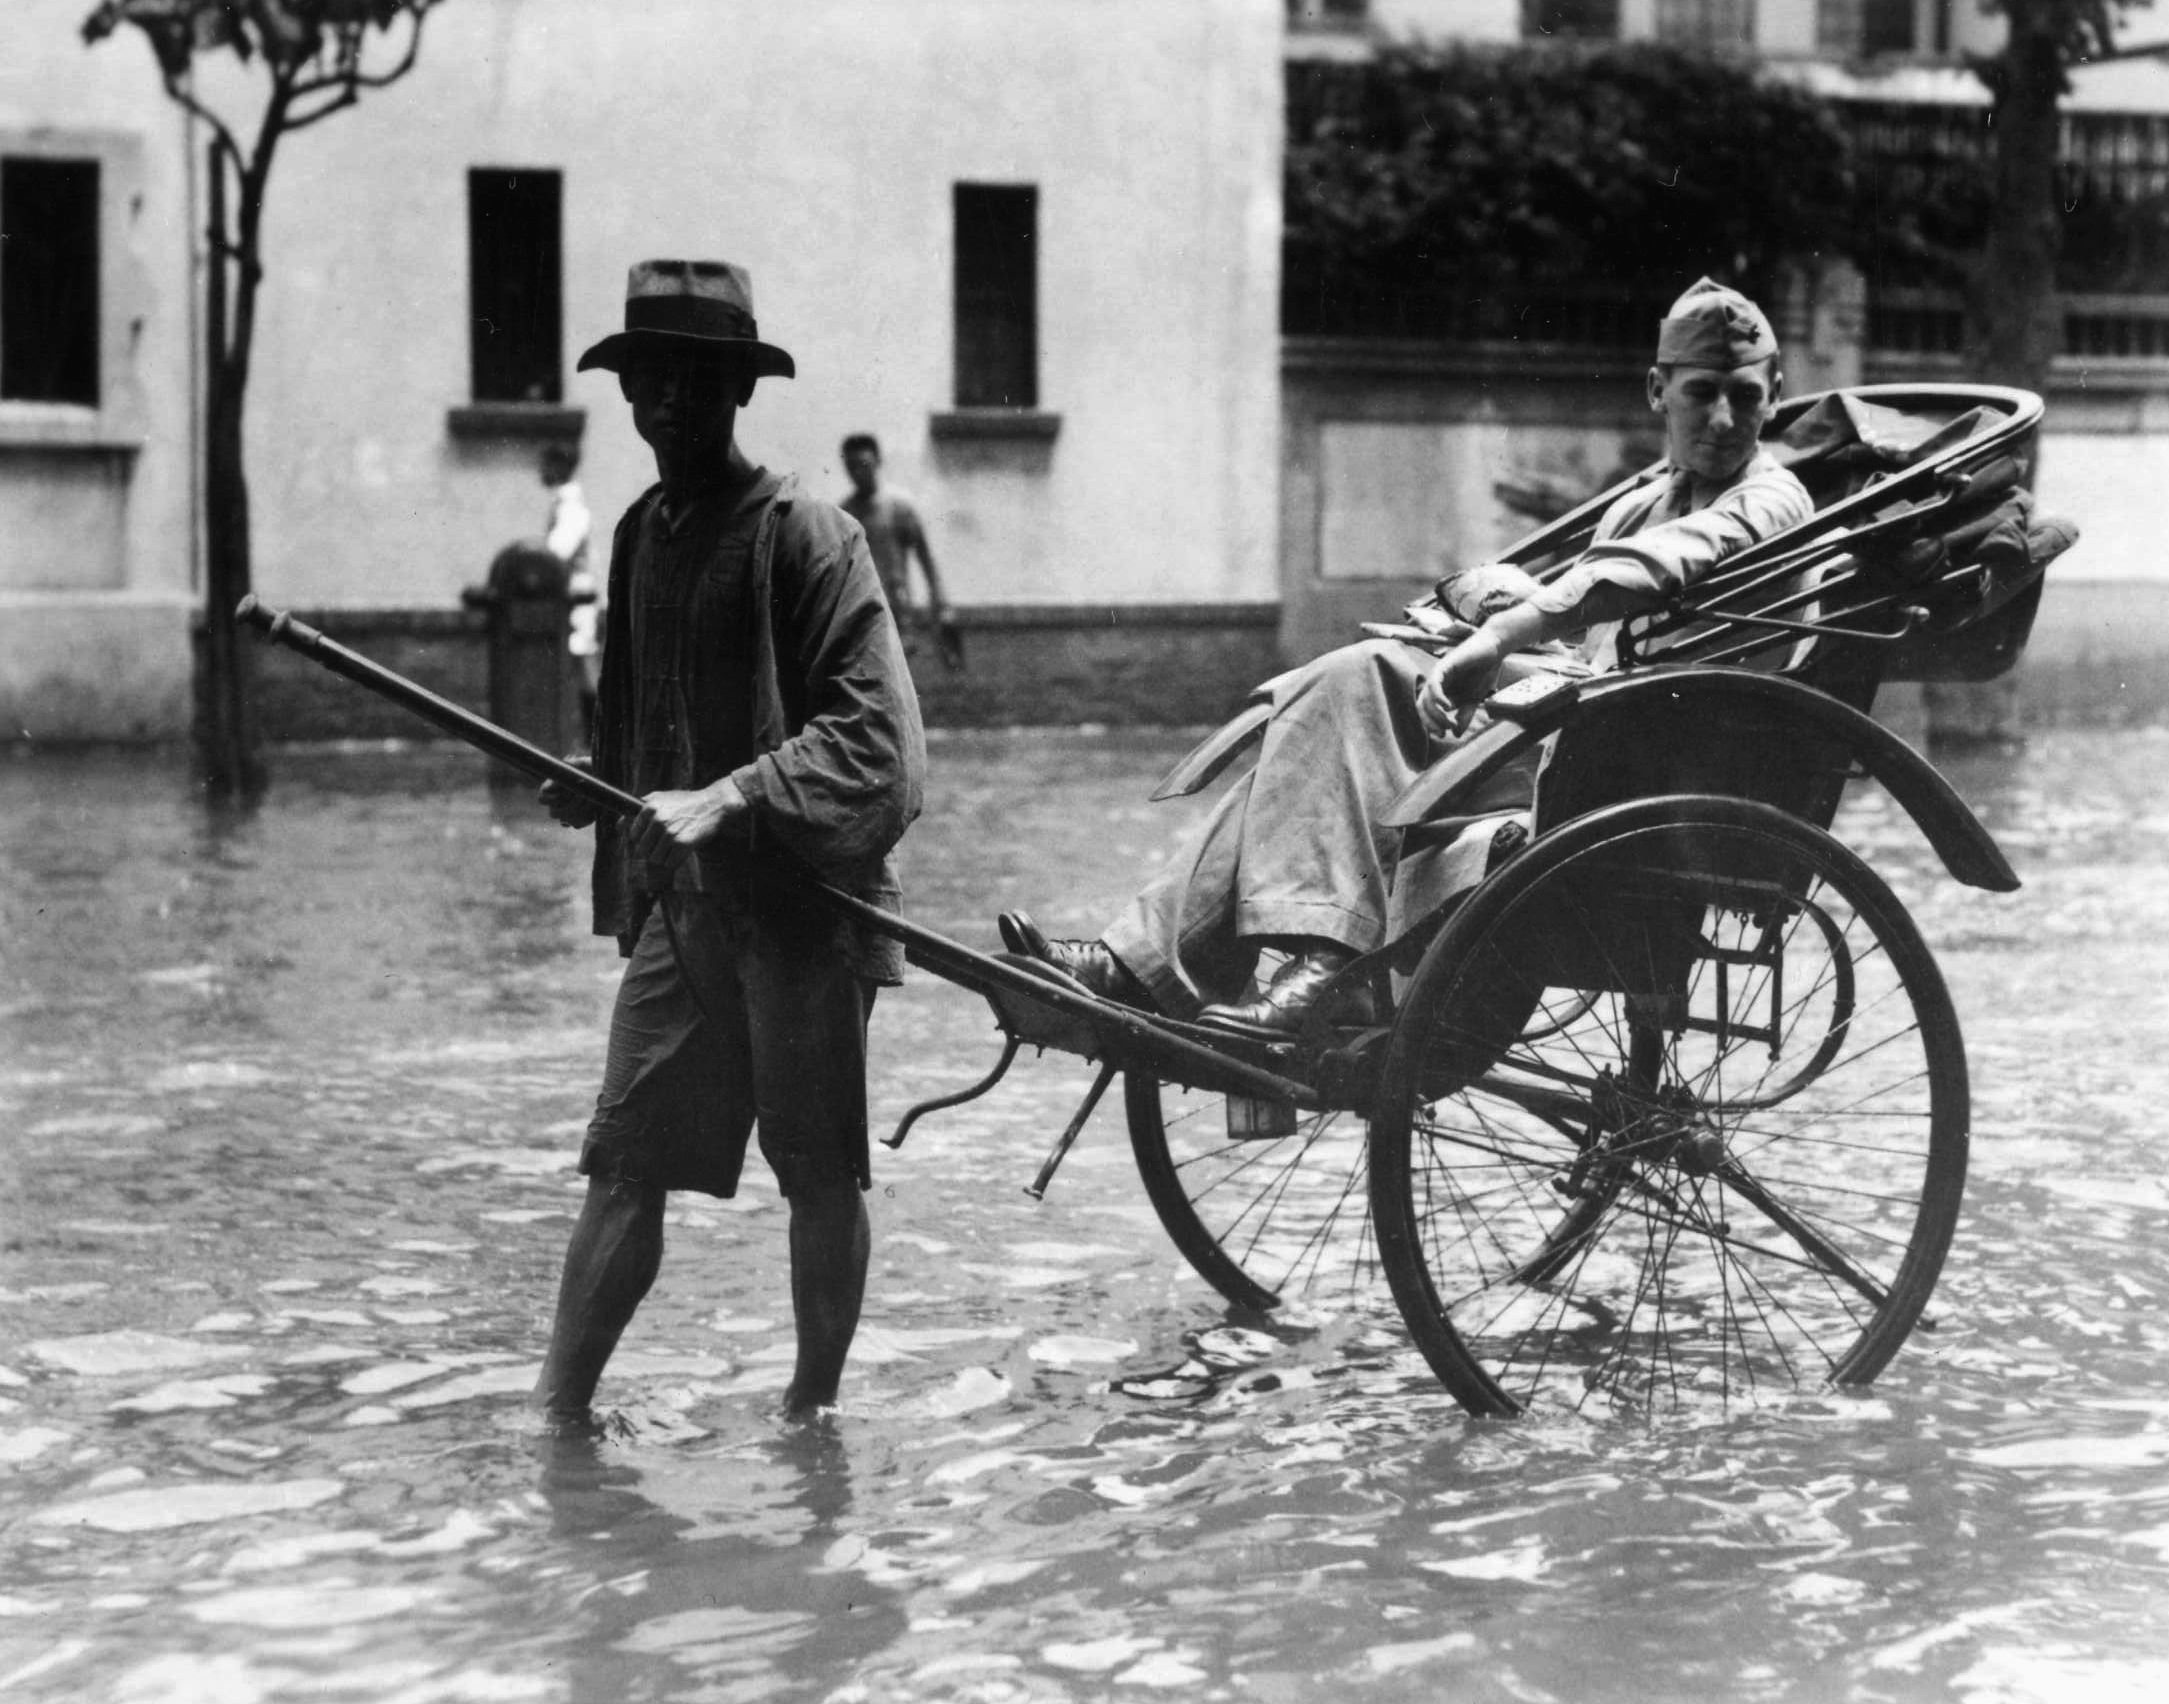 High and dry for the moment, a U.S. Marine rides through floodwaters along a street in Shanghai sometime in 1937. The Americans were part of an international force sent to protect foreign nationals during perilous times on the Asian mainland. (National Archives)